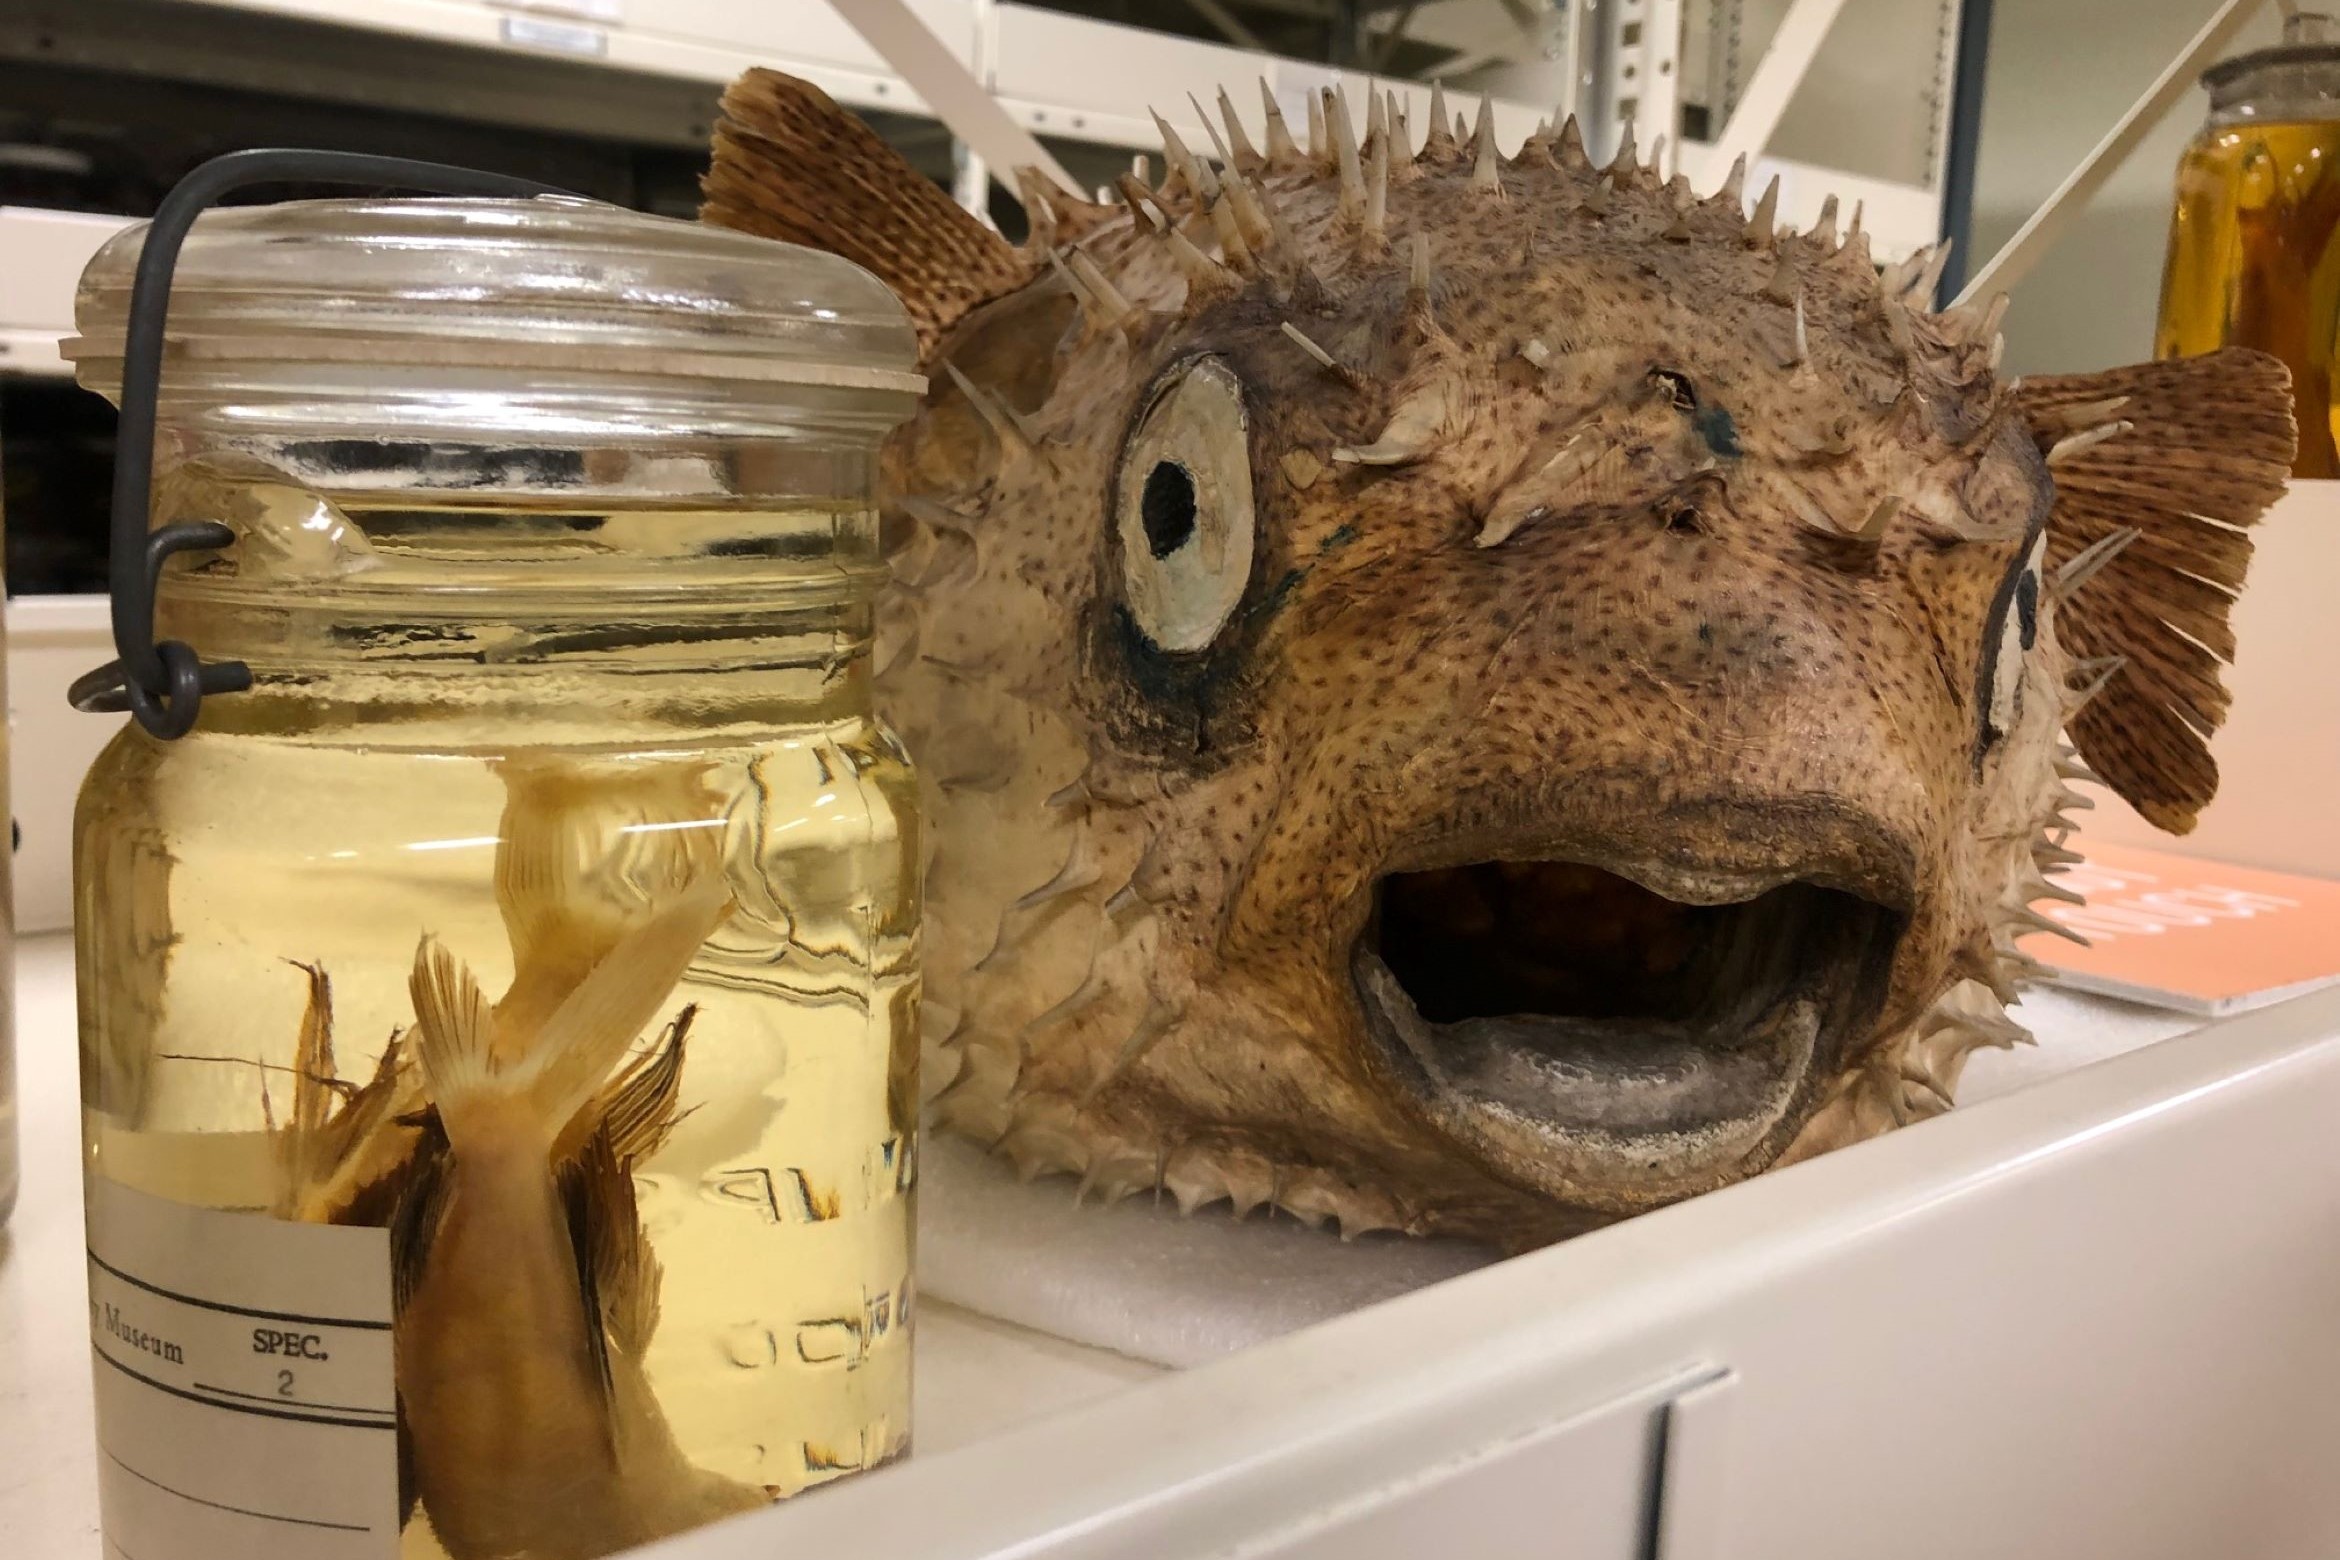 dried pufferfish with look of surprise next to a jar with pickled fish